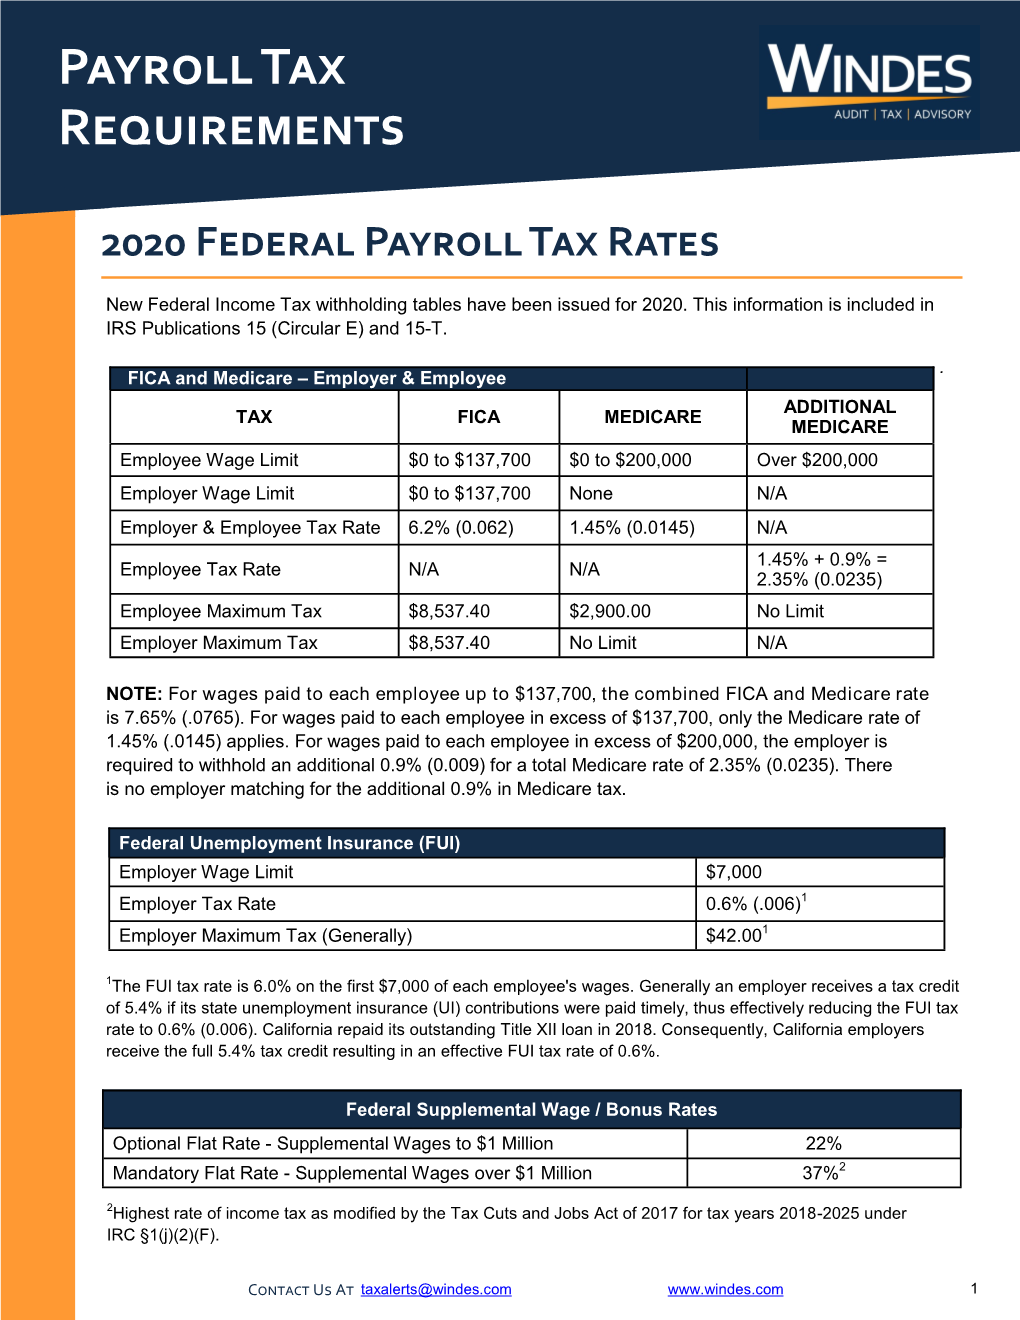 2020 Payroll Tax Requirements